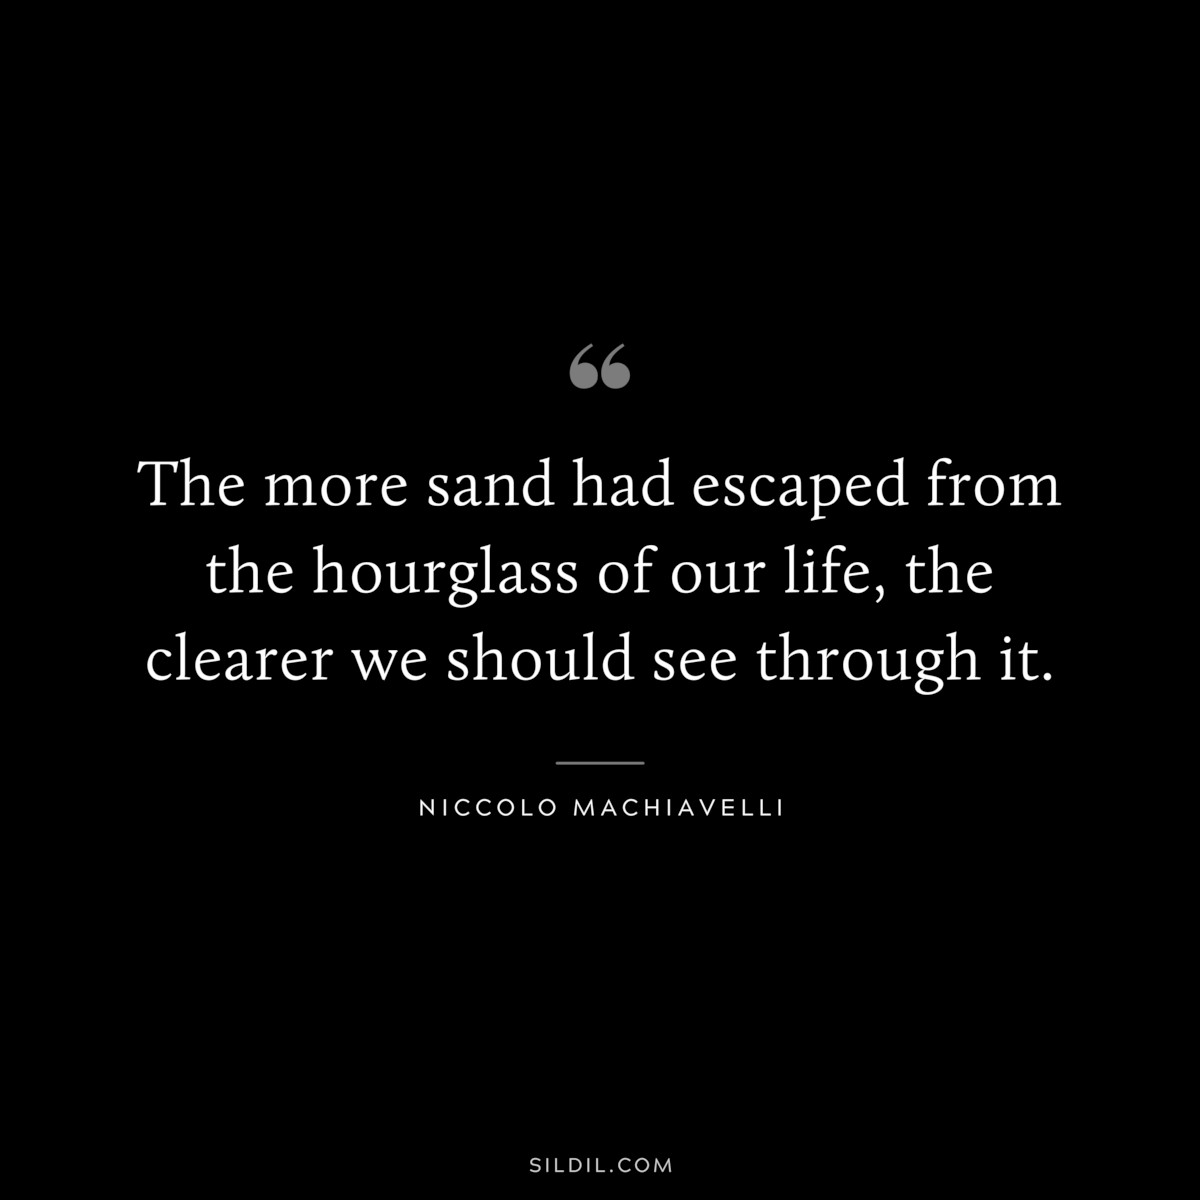 The more sand had escaped from the hourglass of our life, the clearer we should see through it. ― Niccolo Machiavelli